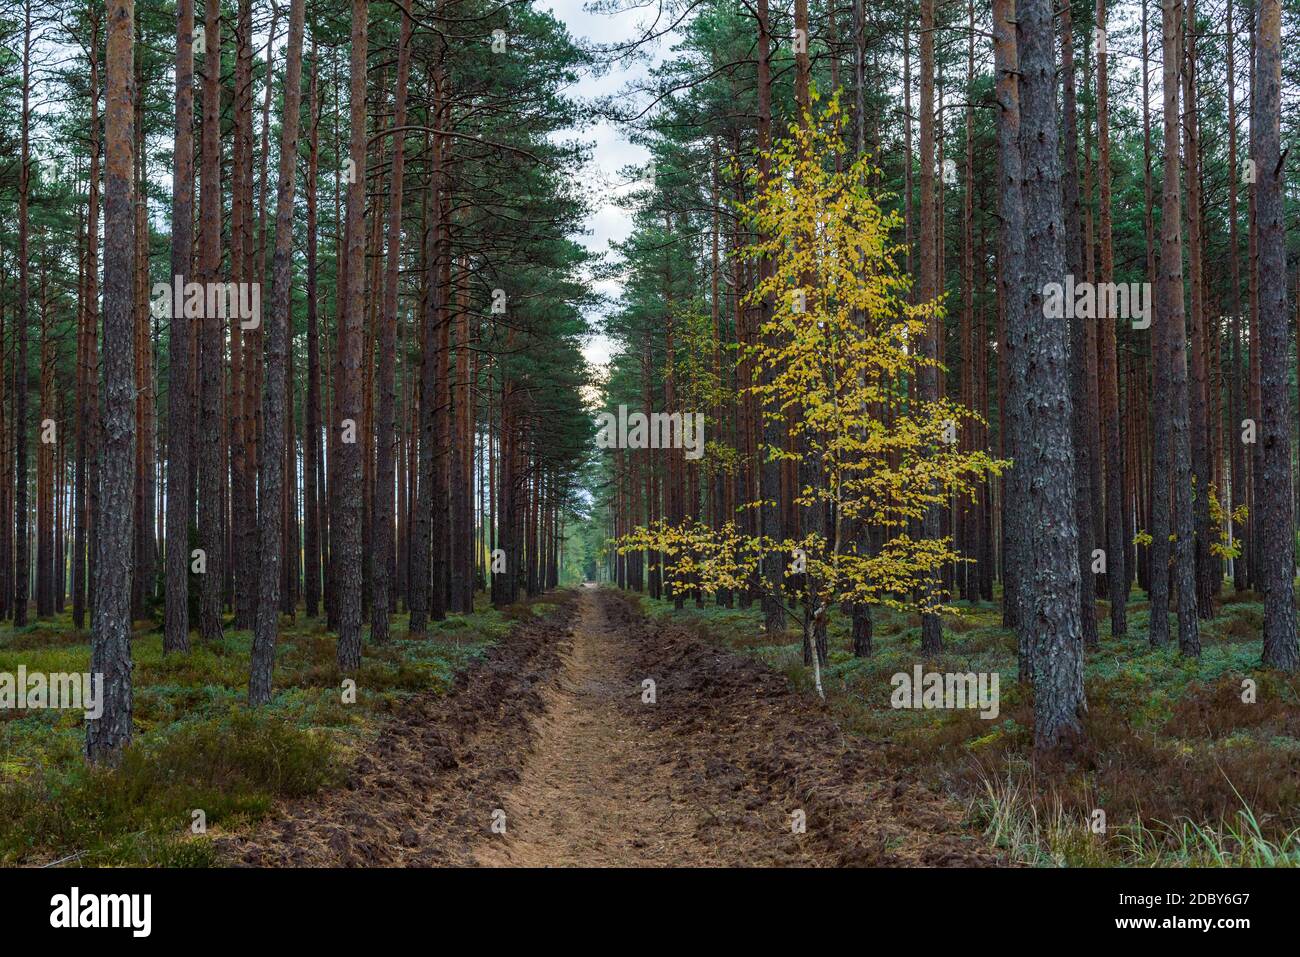 small birch has grown in a coniferous forest and with its autumn yellow leaves is well visible among the green natural colors of the forest Stock Photo